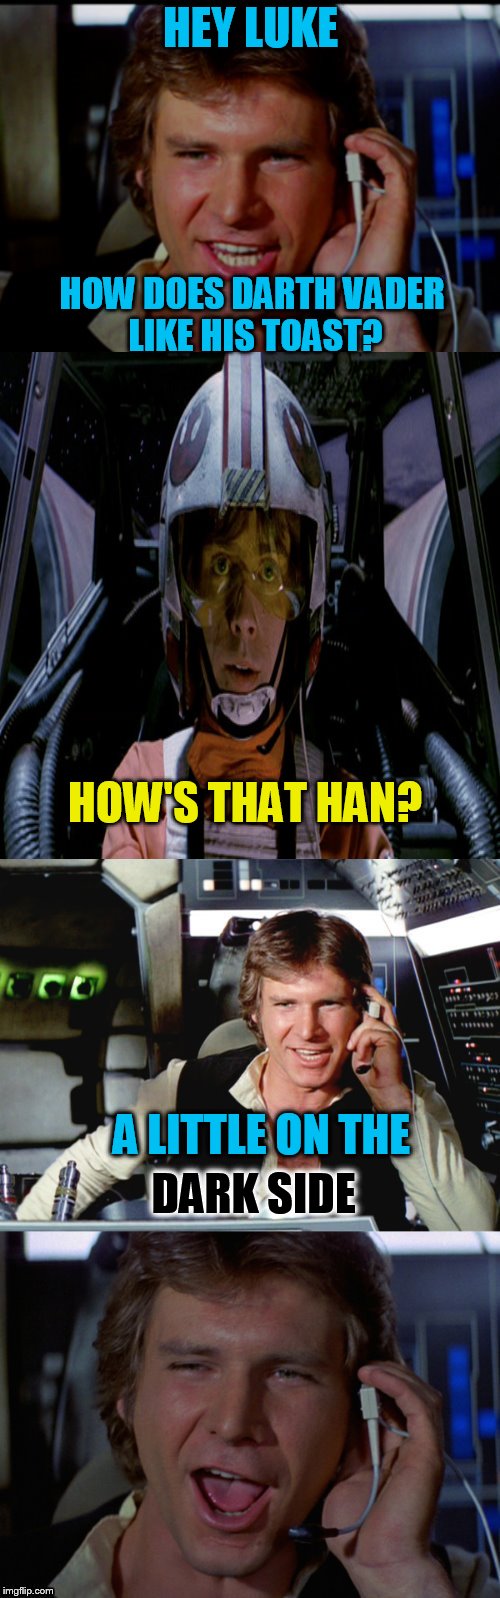 Bad pun han solo | HEY LUKE; HOW DOES DARTH VADER LIKE HIS TOAST? HOW'S THAT HAN? A LITTLE ON THE; DARK SIDE | image tagged in bad pun han solo,luke skywalker,han solo,jokes,darth vader,funny meme | made w/ Imgflip meme maker